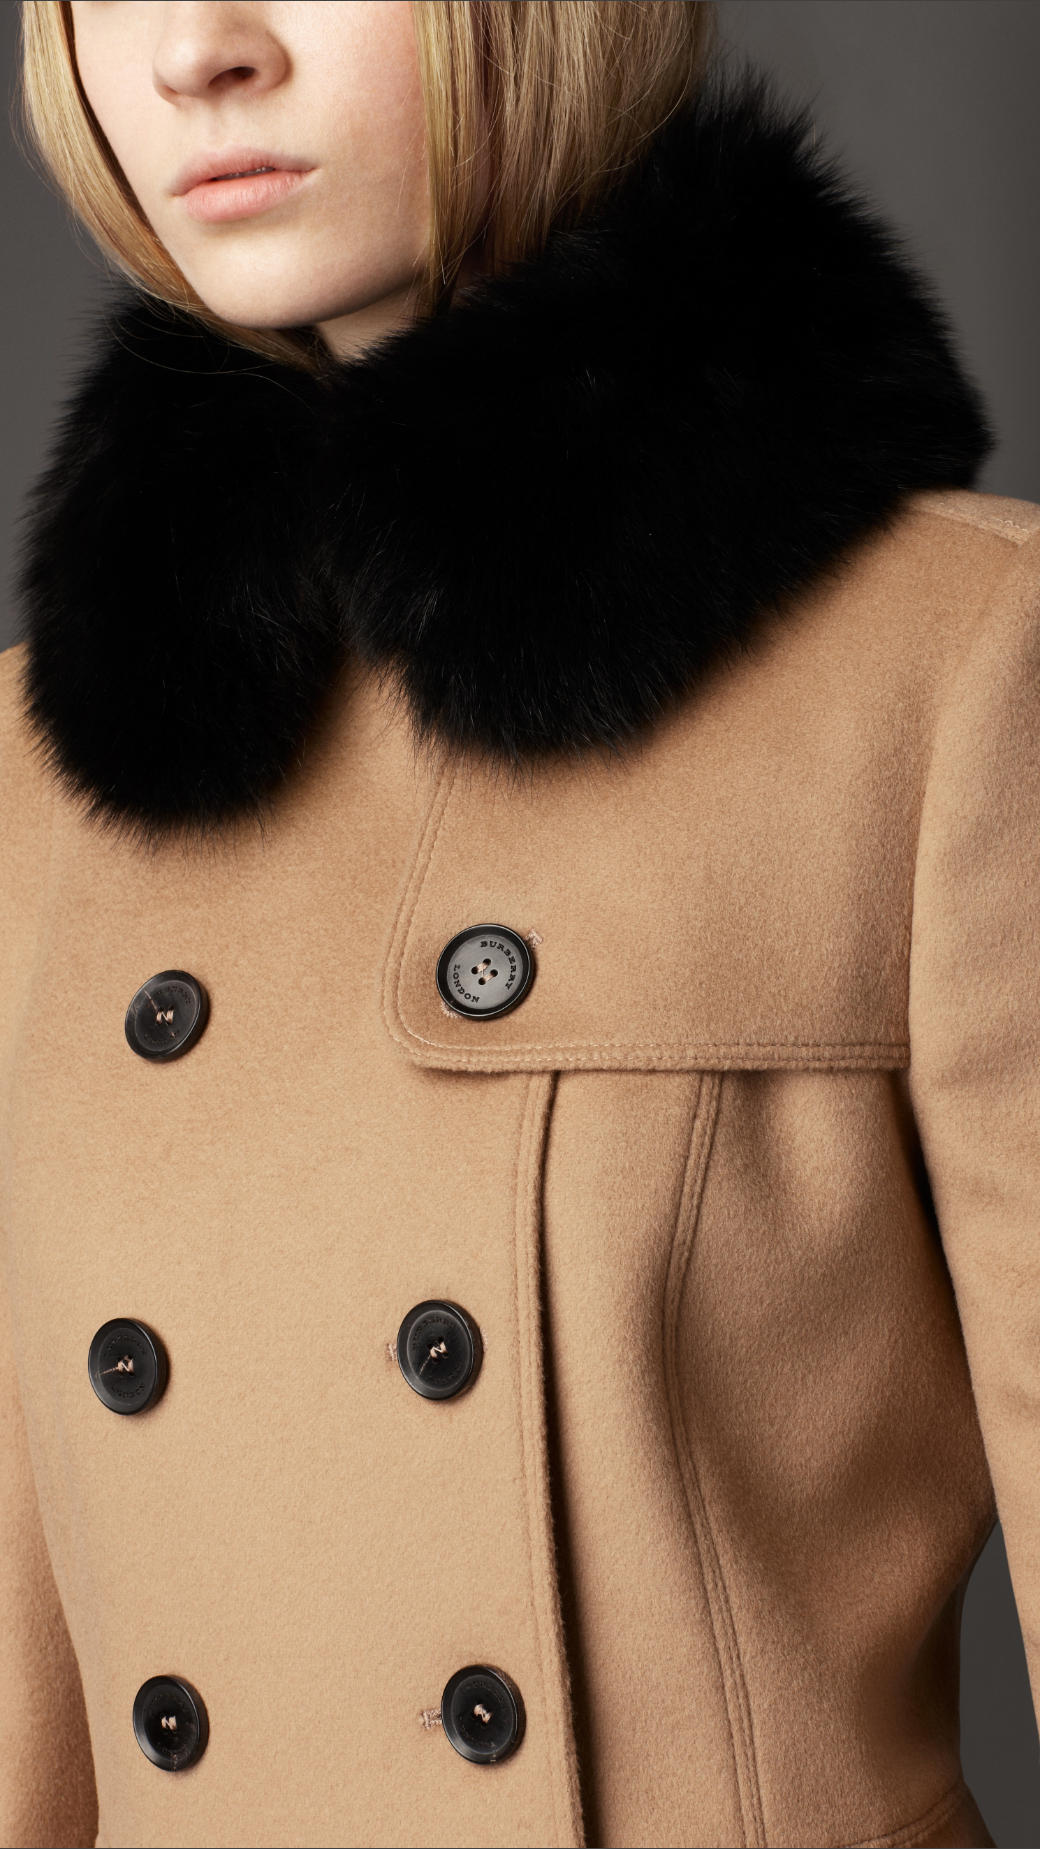 Burberry Midlength Wool Cashmere Fur Collar Trench Coat in Camel (Natural)  | Lyst